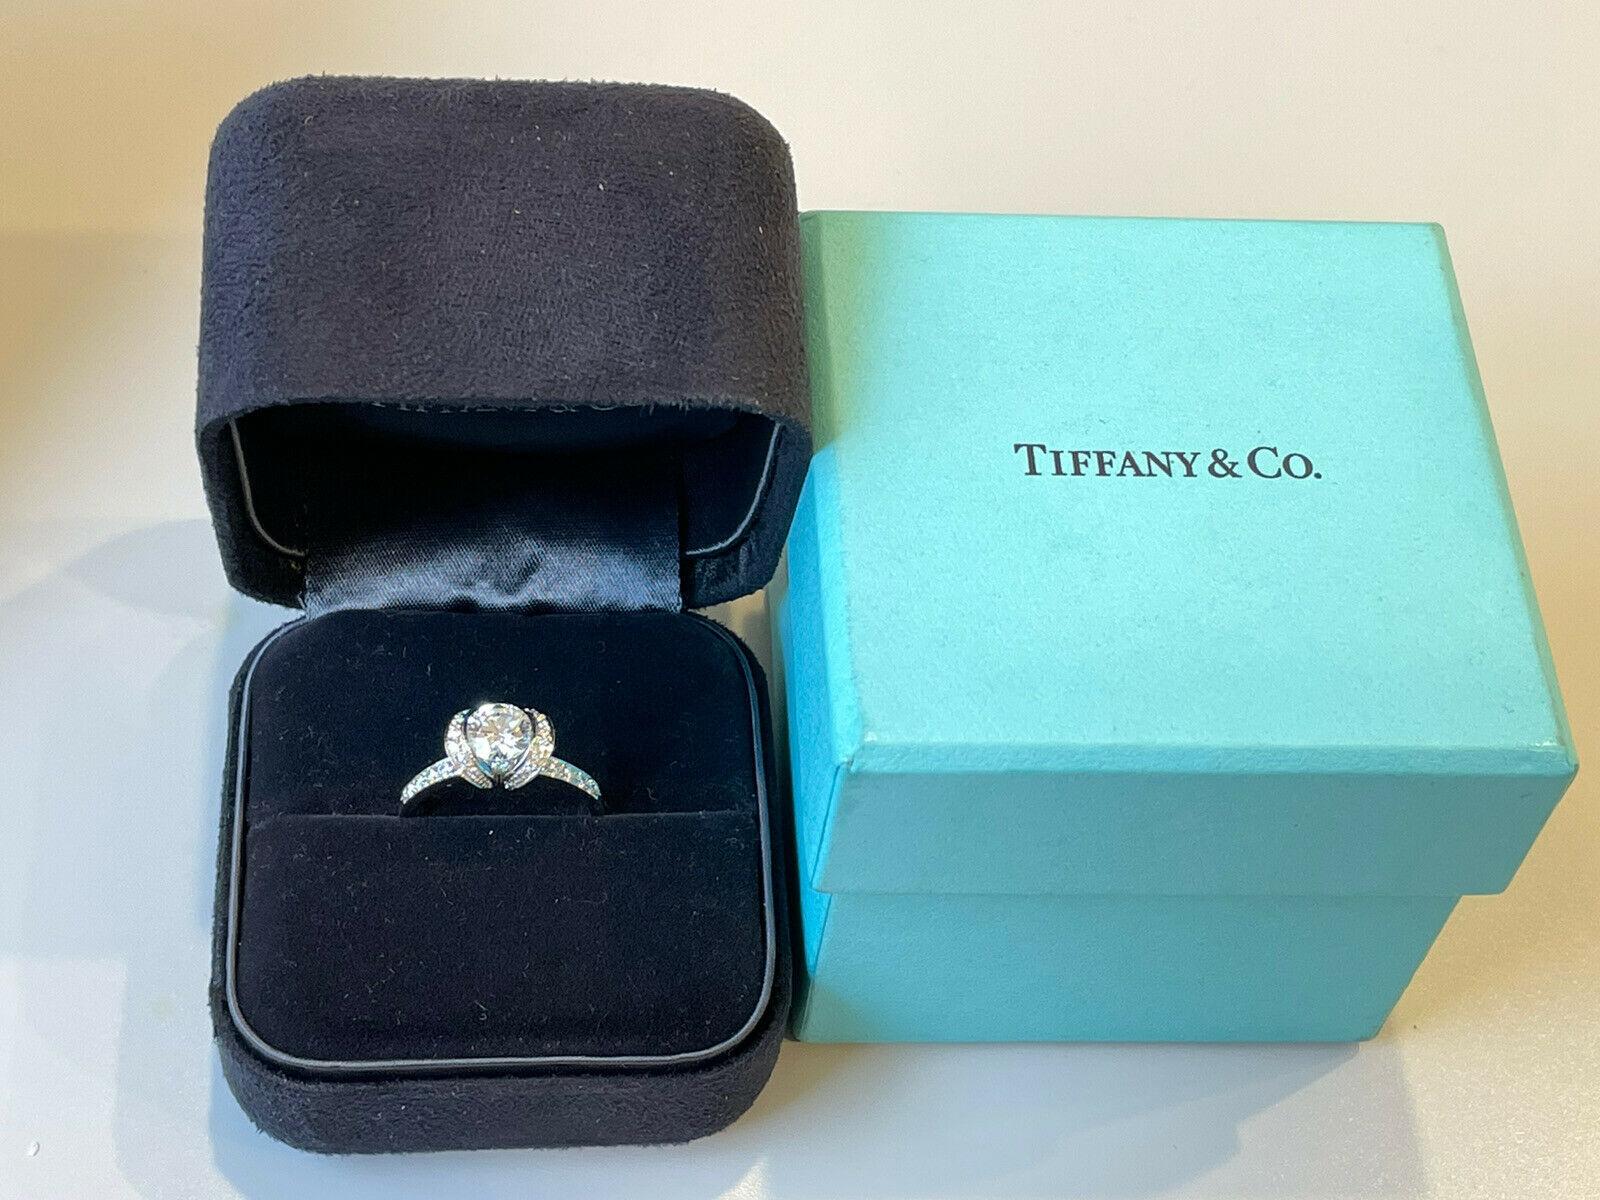 Tiffany & Co. Platinum and Diamond Ribbon Ring 1.07 Carat E VVS1 In Excellent Condition For Sale In Beverly Hills, CA